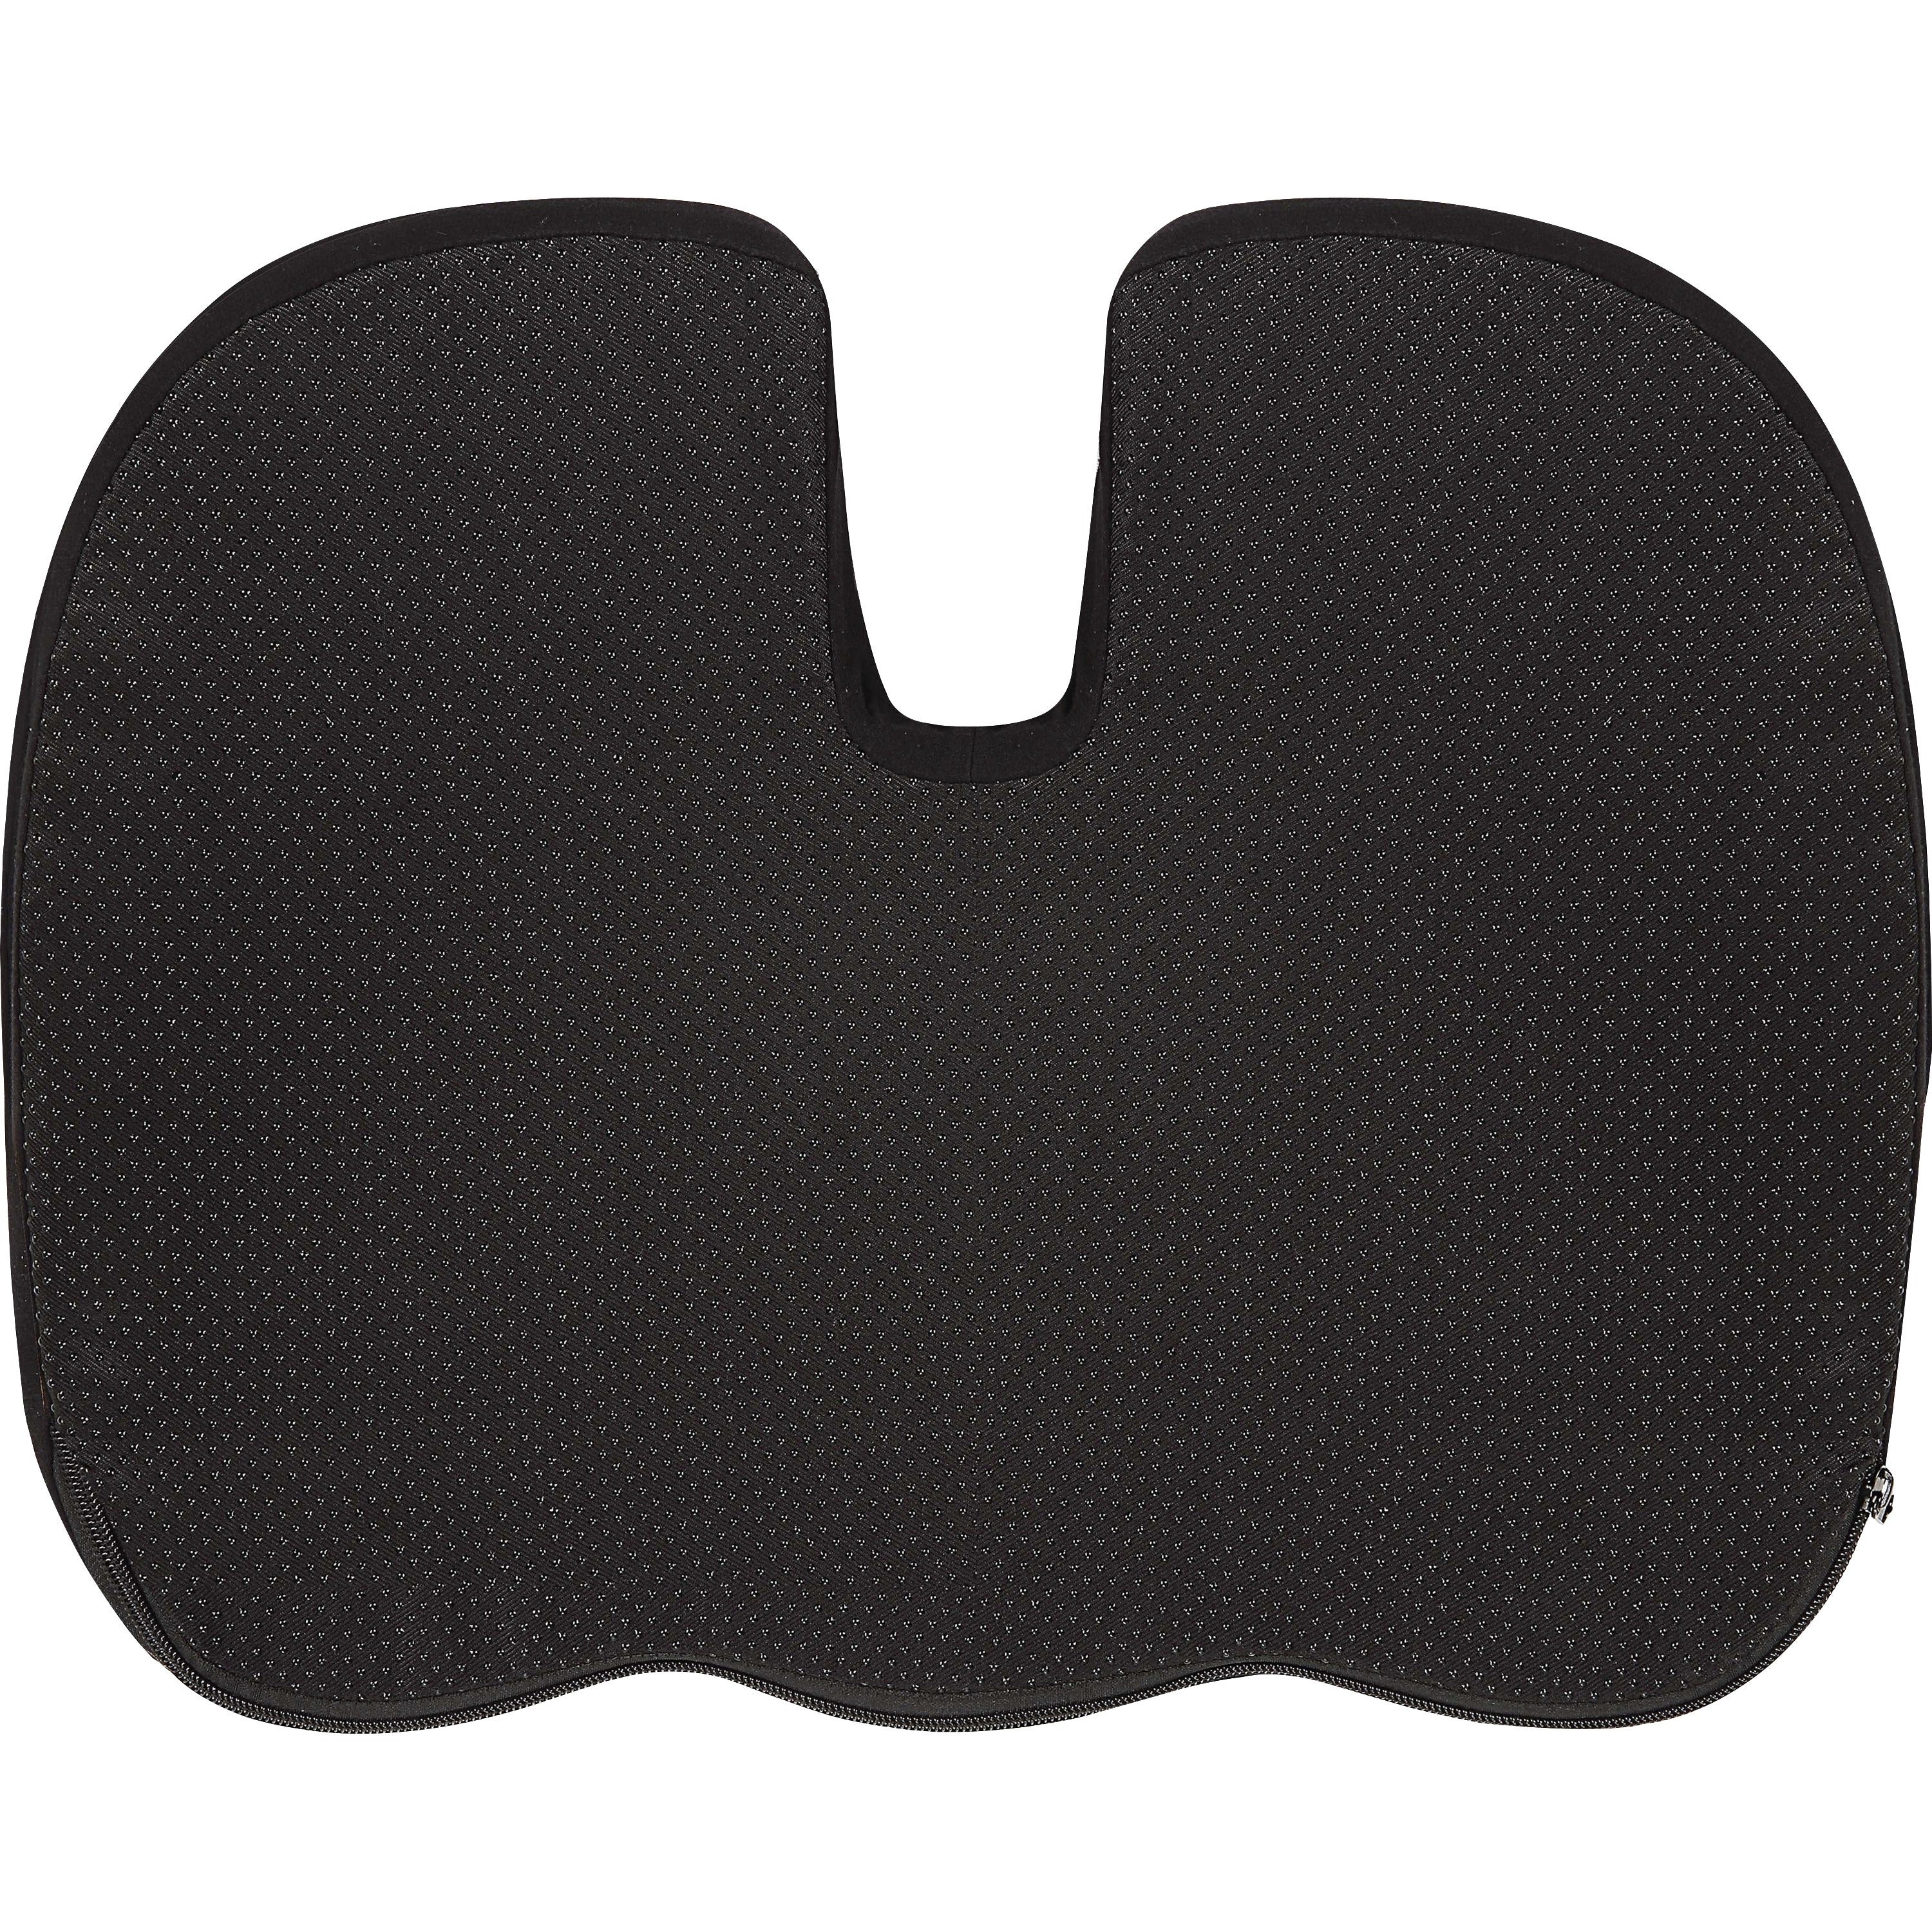 lorell-butterfly-shaped-seat-cushion-1750-x-1550-fabric-memory-foam-silicone-butterfly-comfortable-ergonomic-design-durable-machine-washable-zippered-anti-slip-black-1each_llr18307 - 2